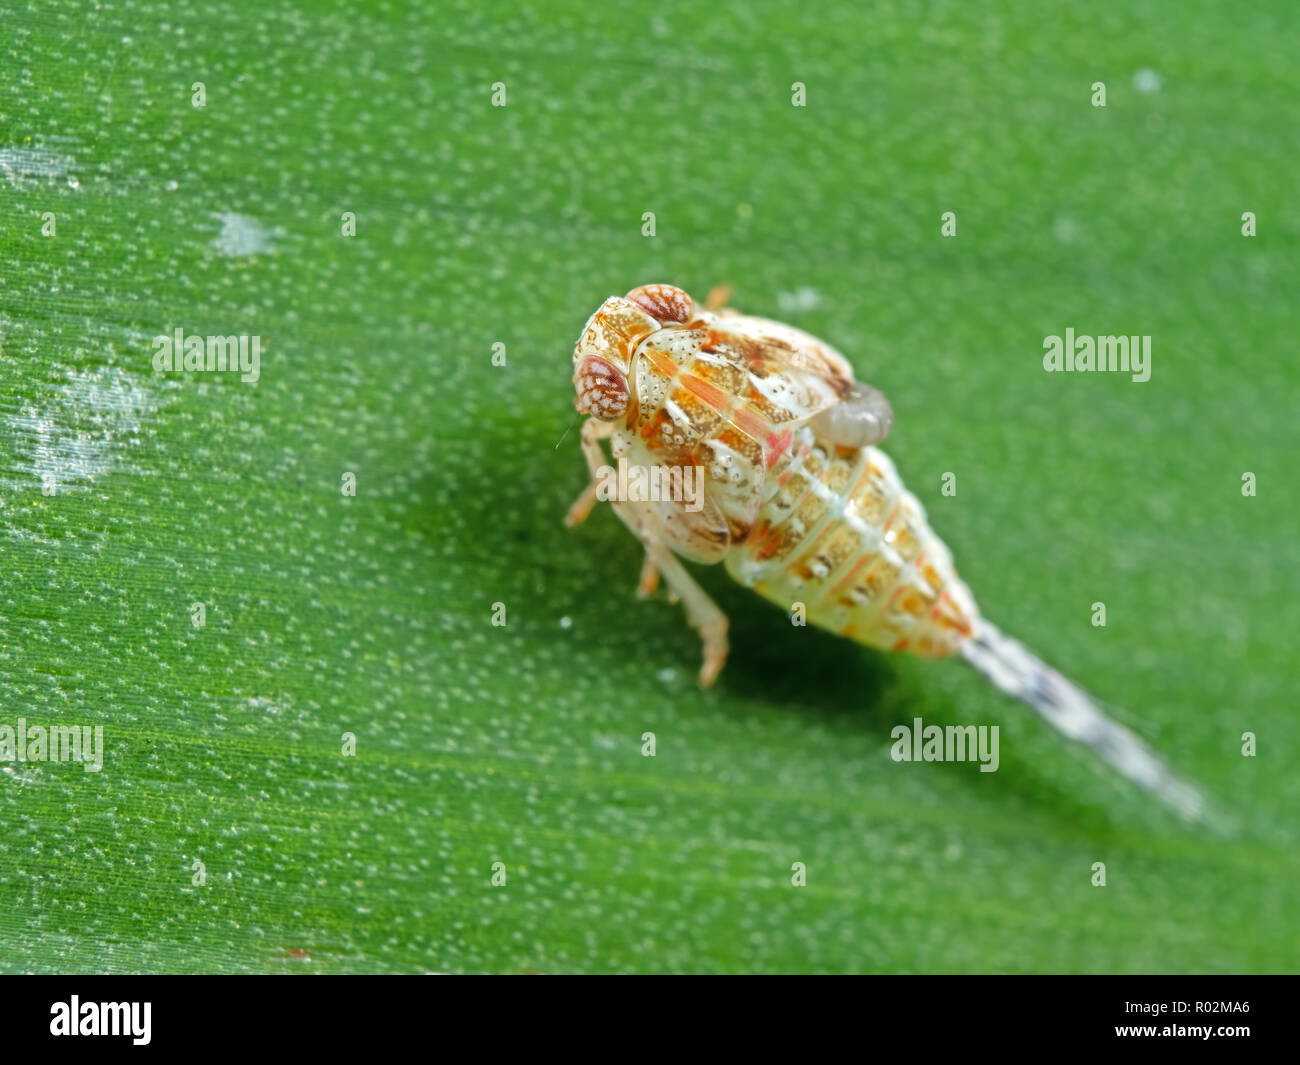 Macro Photography of Planthopper on Green Leaf Stock Photo